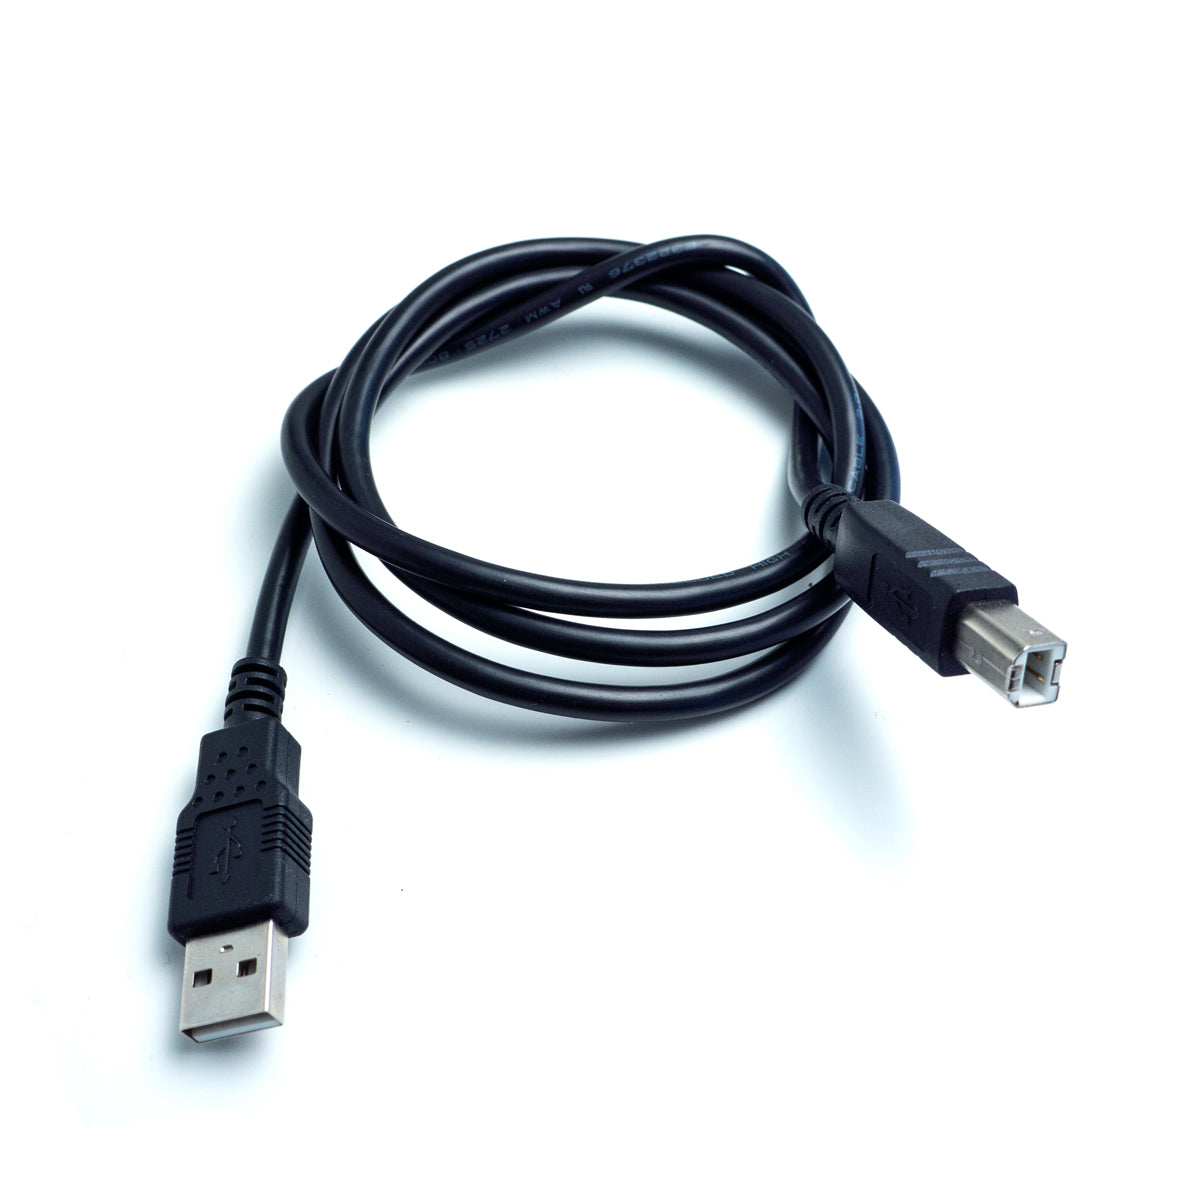 USB Cable (CA049)